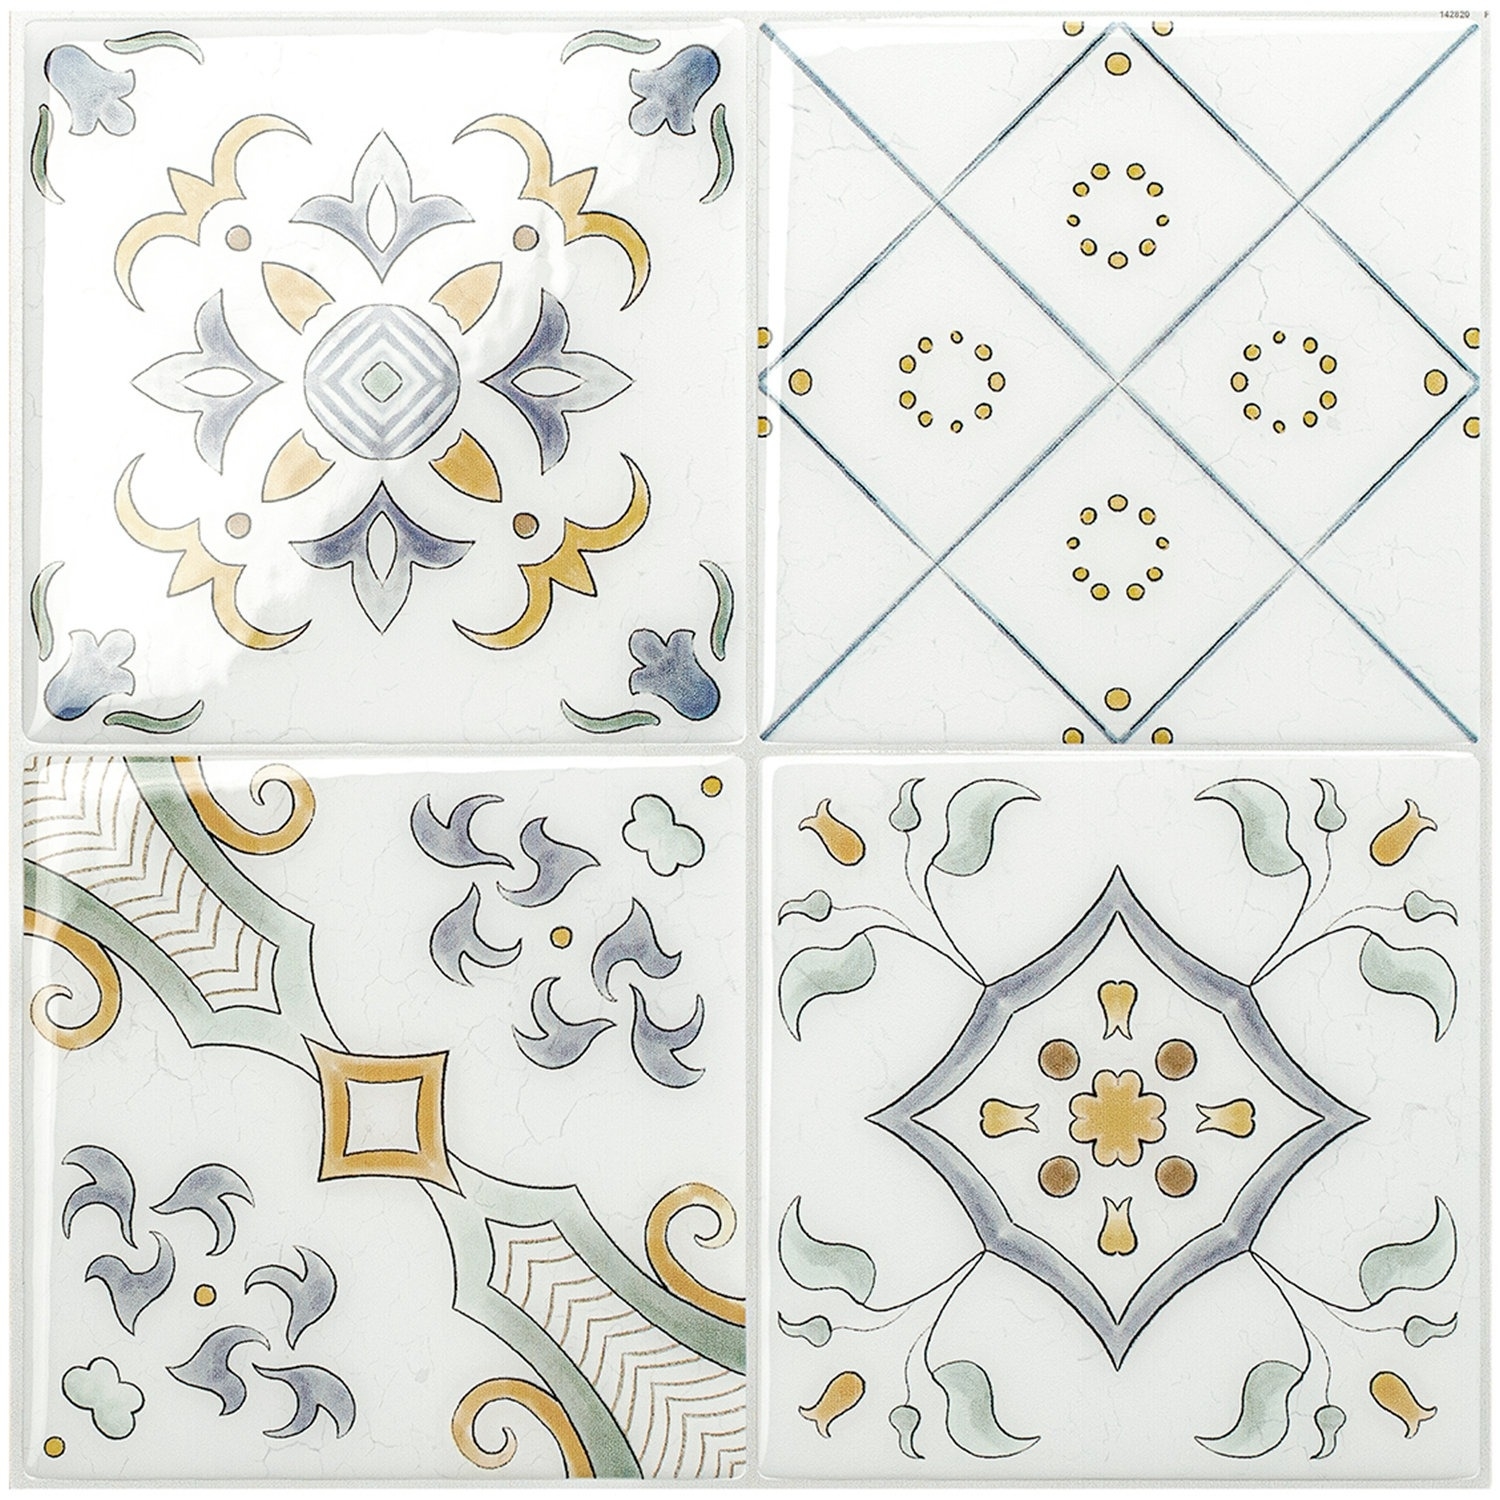 Four decorative tiles with intricate patterns